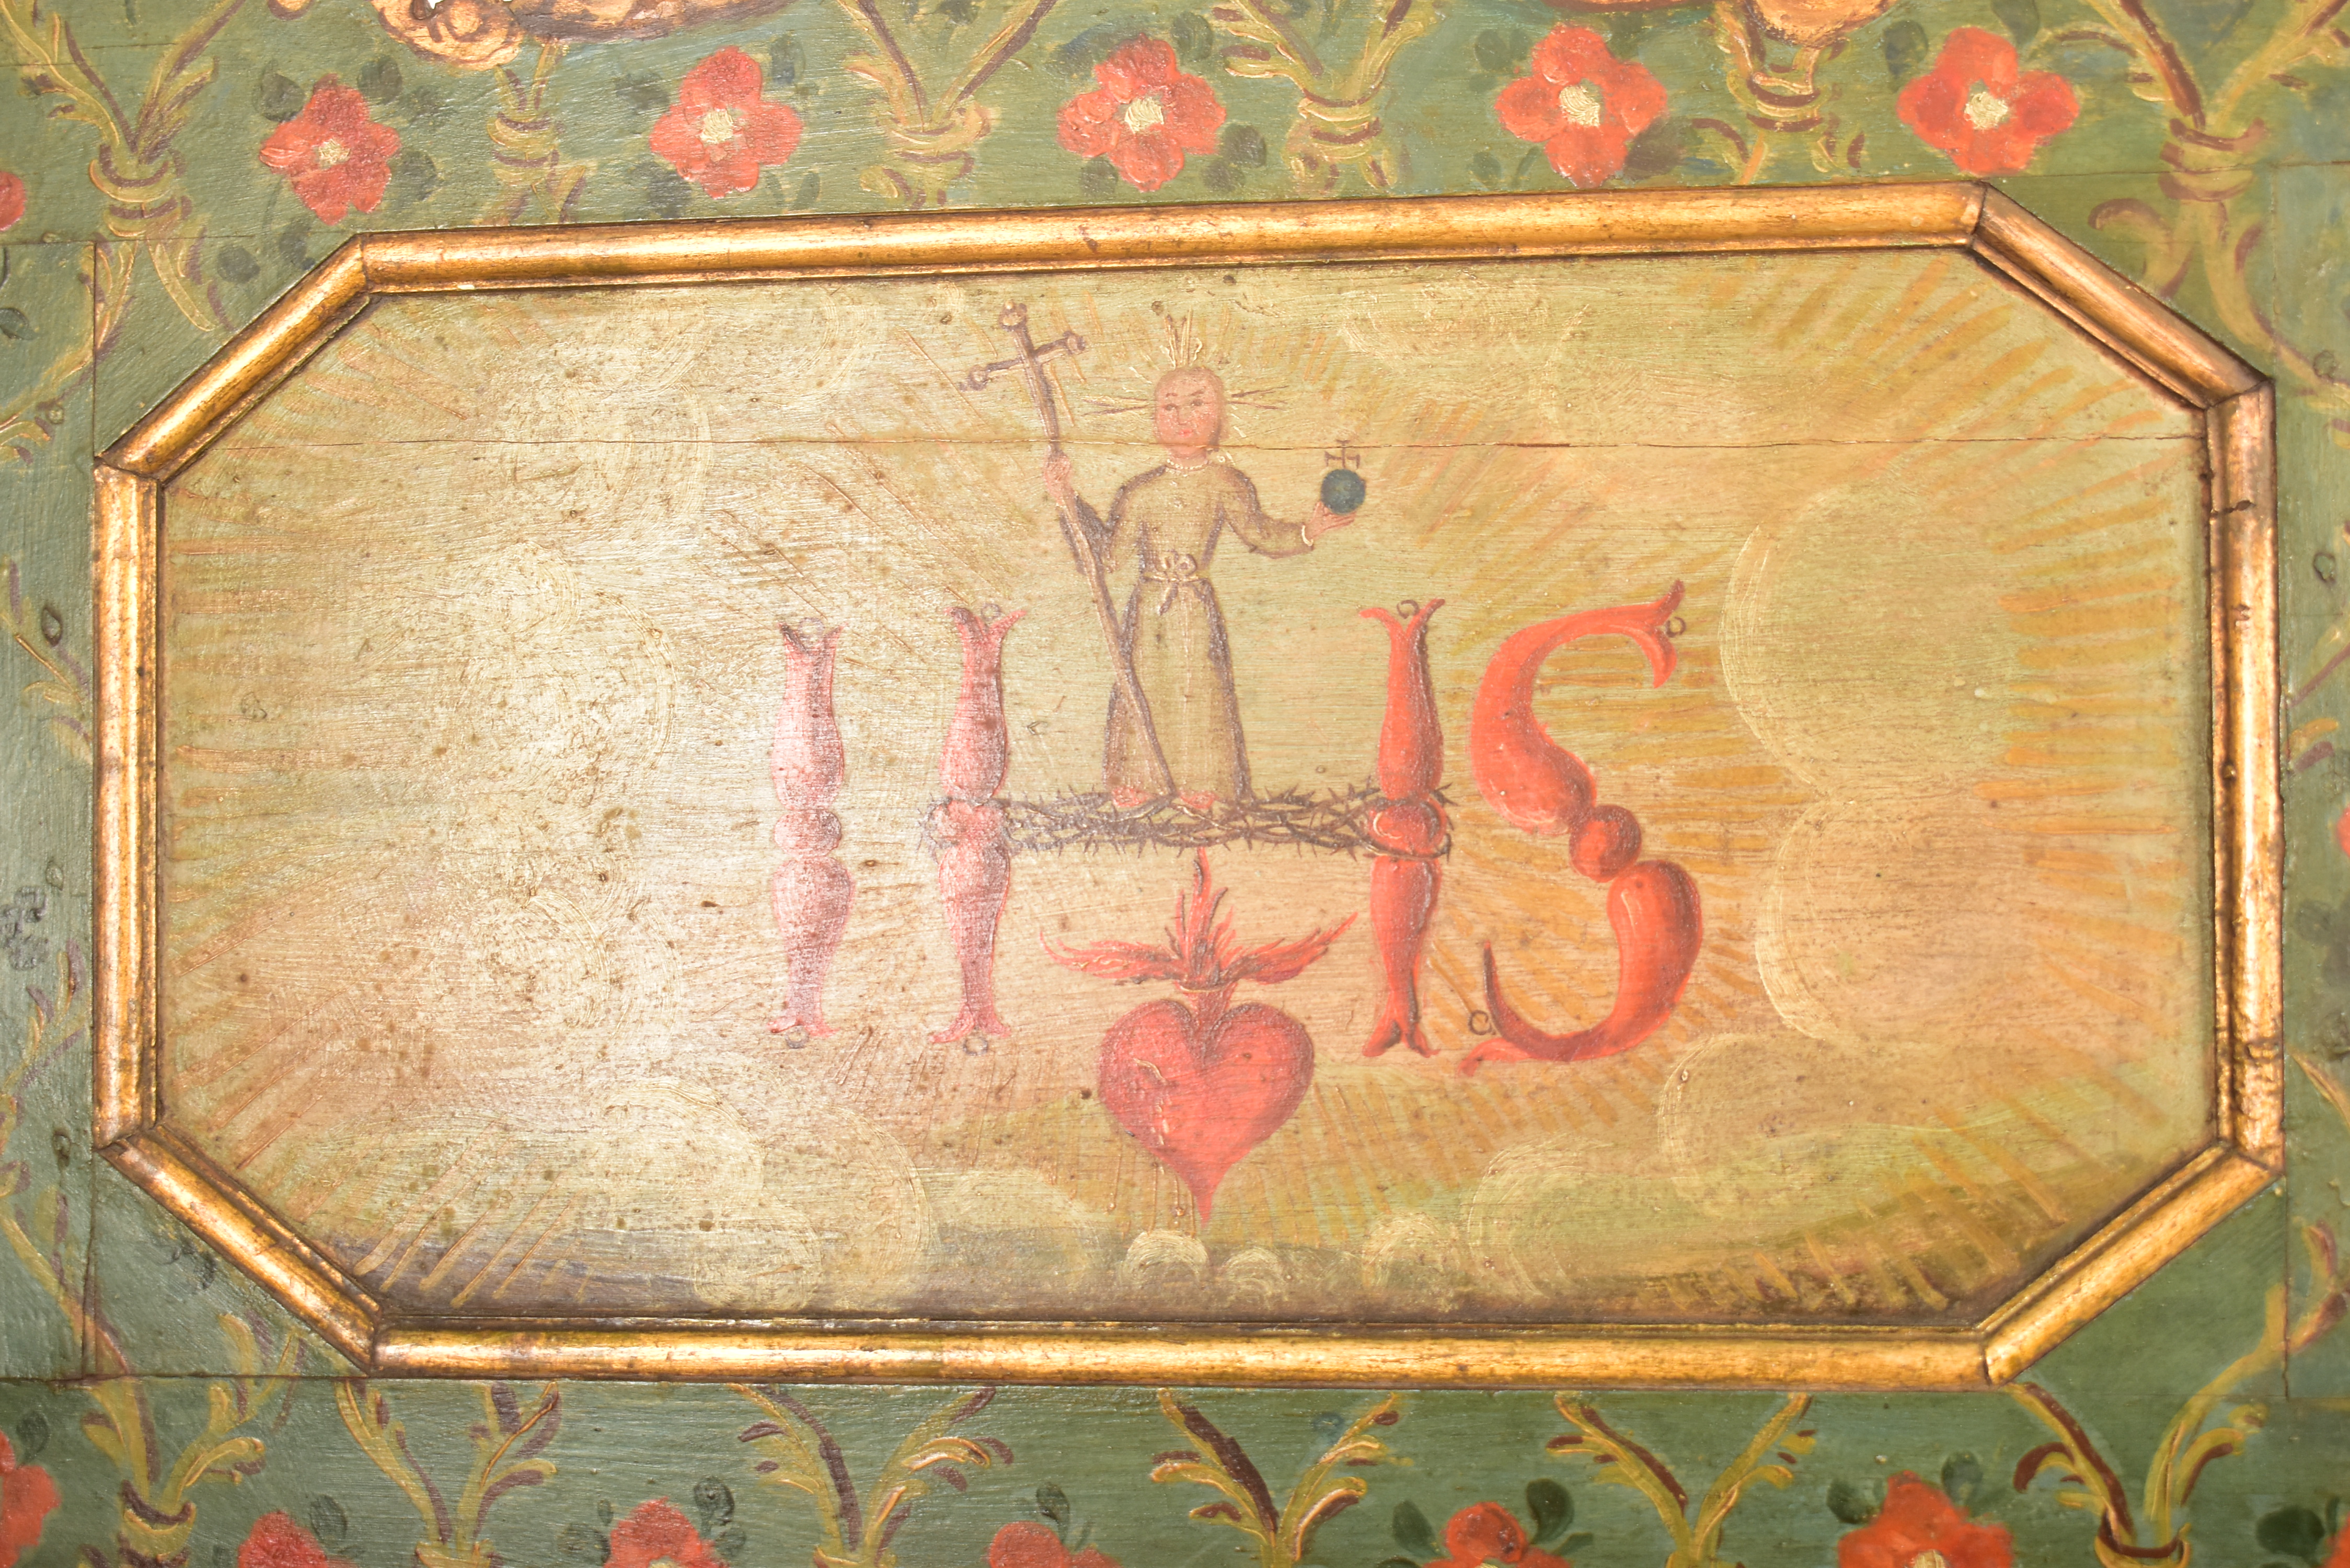 AUSTRIAN 19TH CENTURY HAND PAINTED WOOD RUSTIC FOLK SINGLE BED - Image 3 of 10